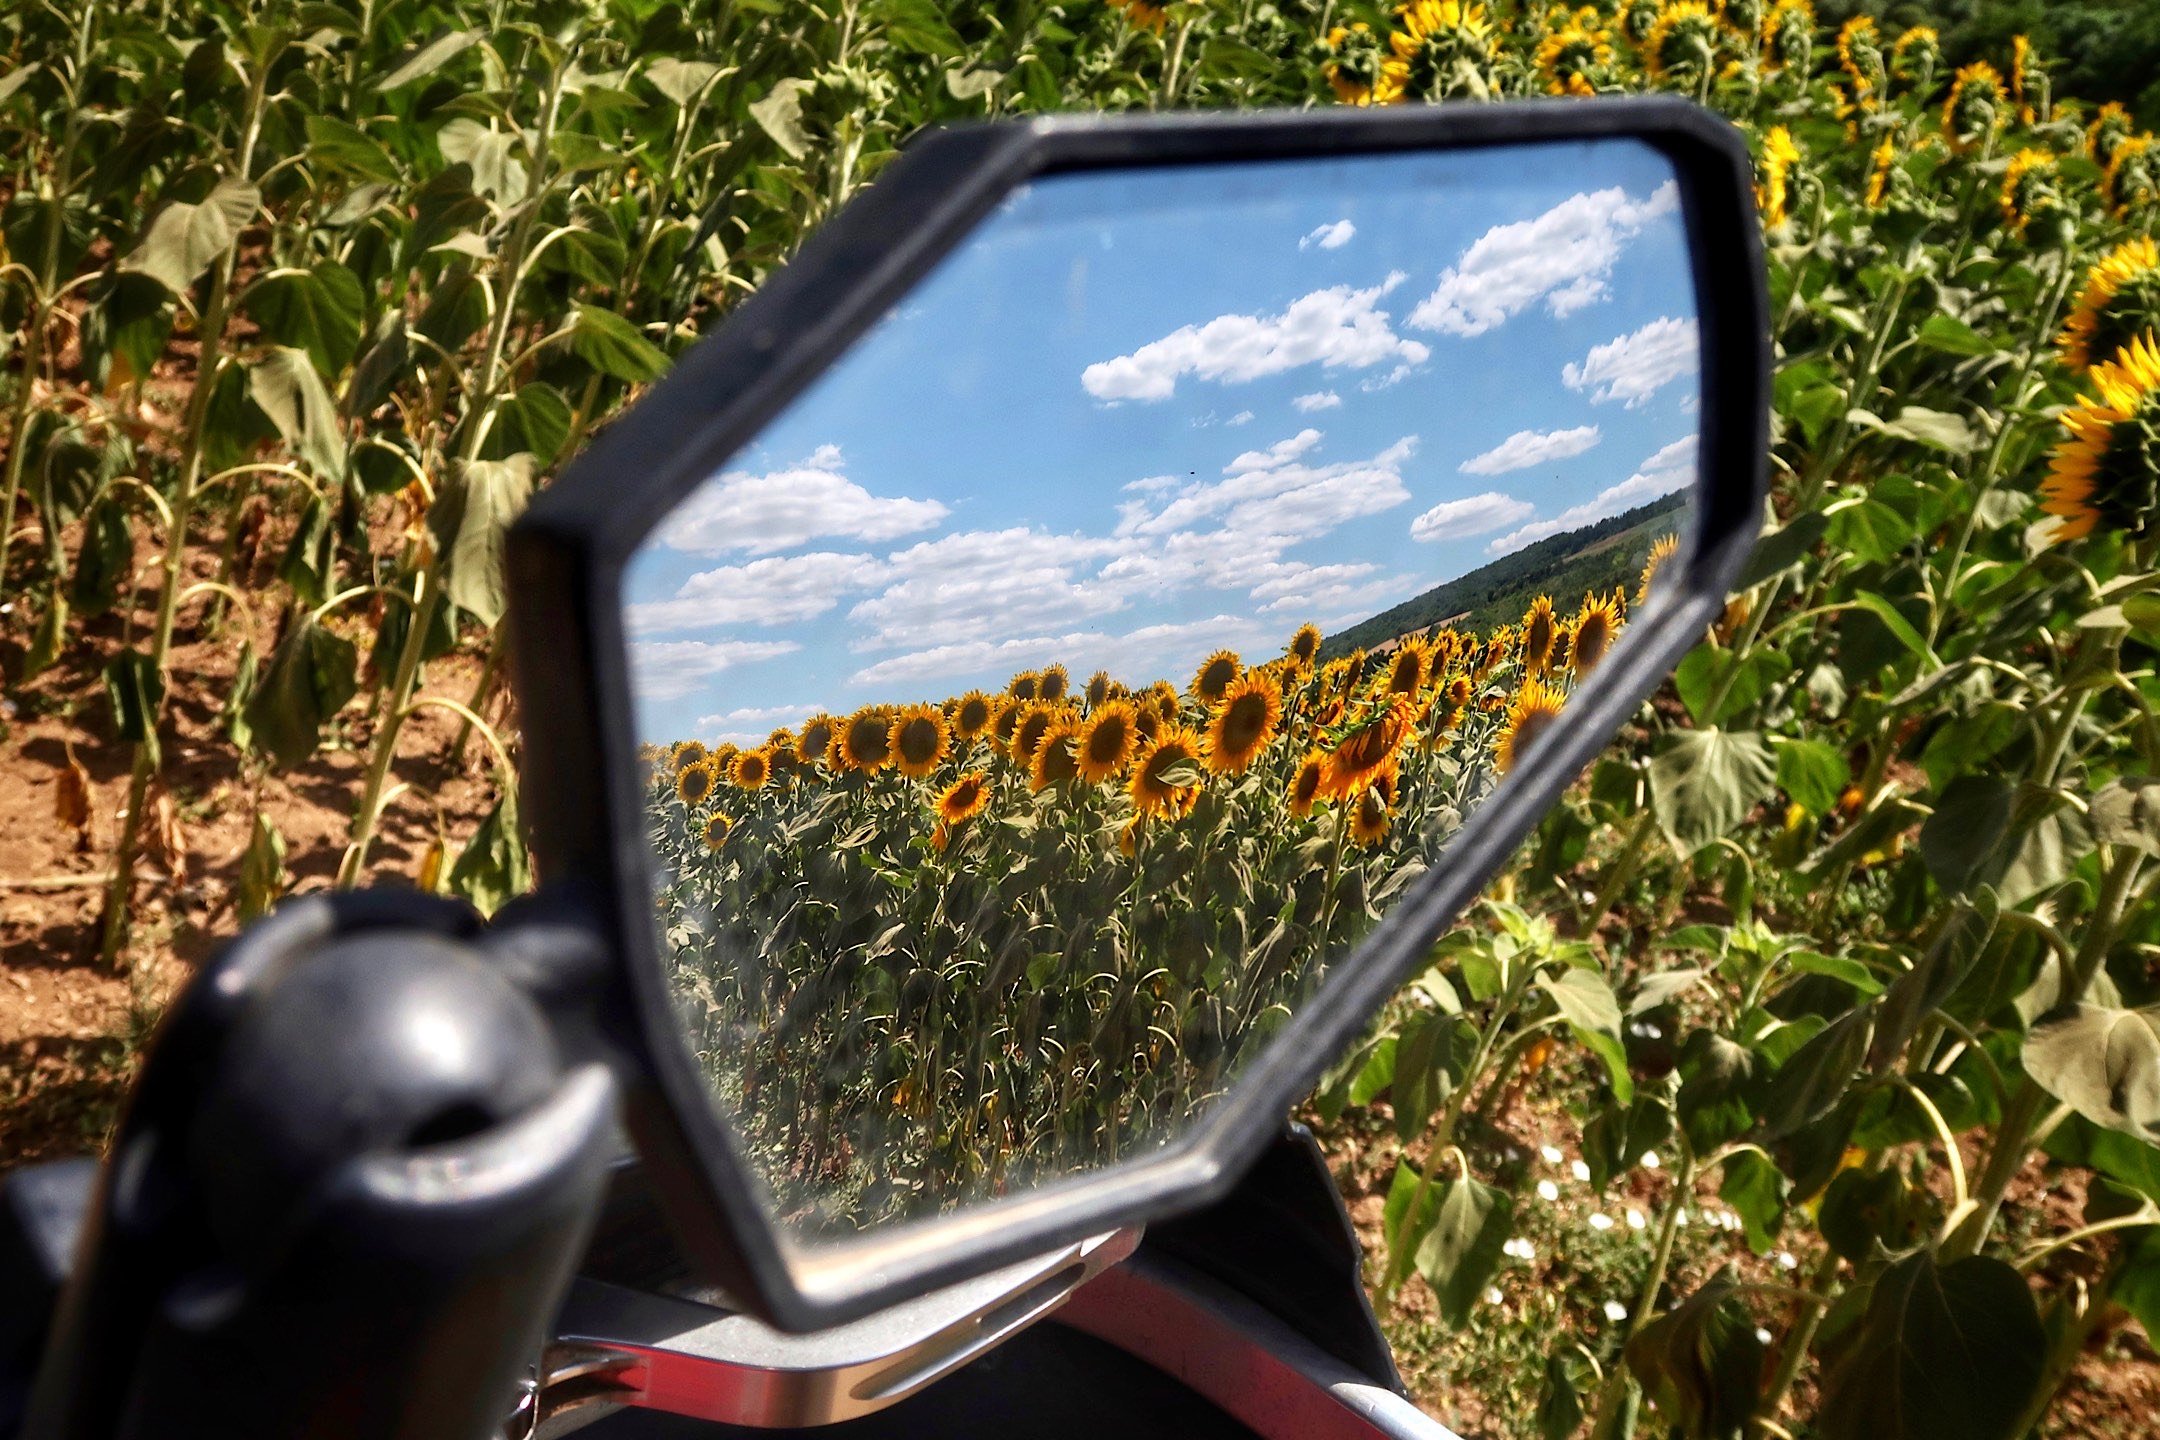  Motorcycle mirror with field of sunflowers in background. 